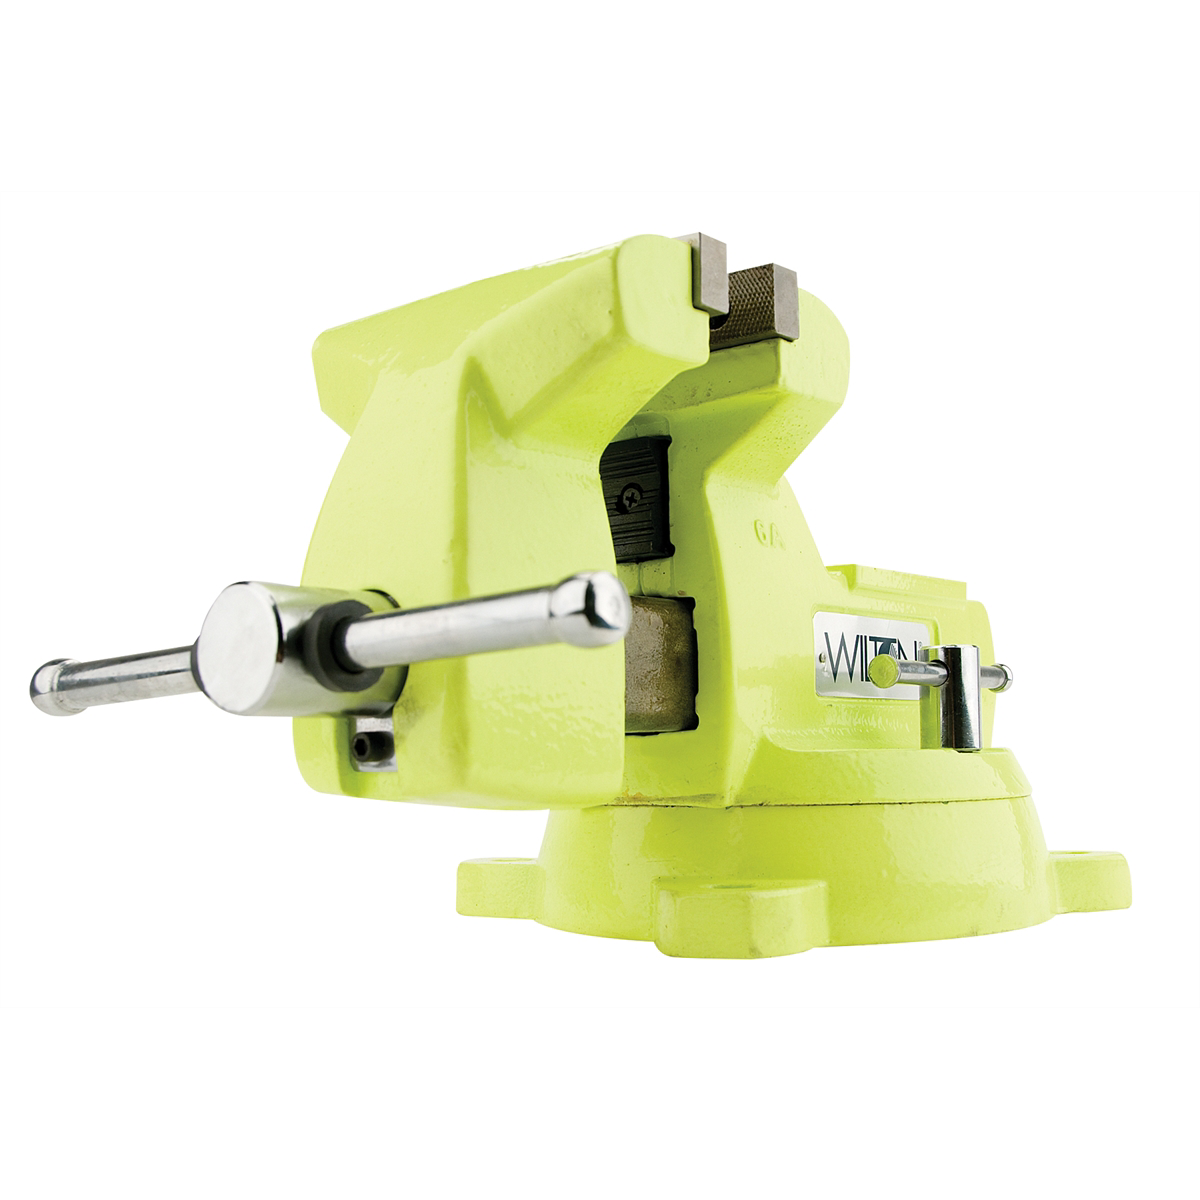 6 In High Visibility Safety Vise